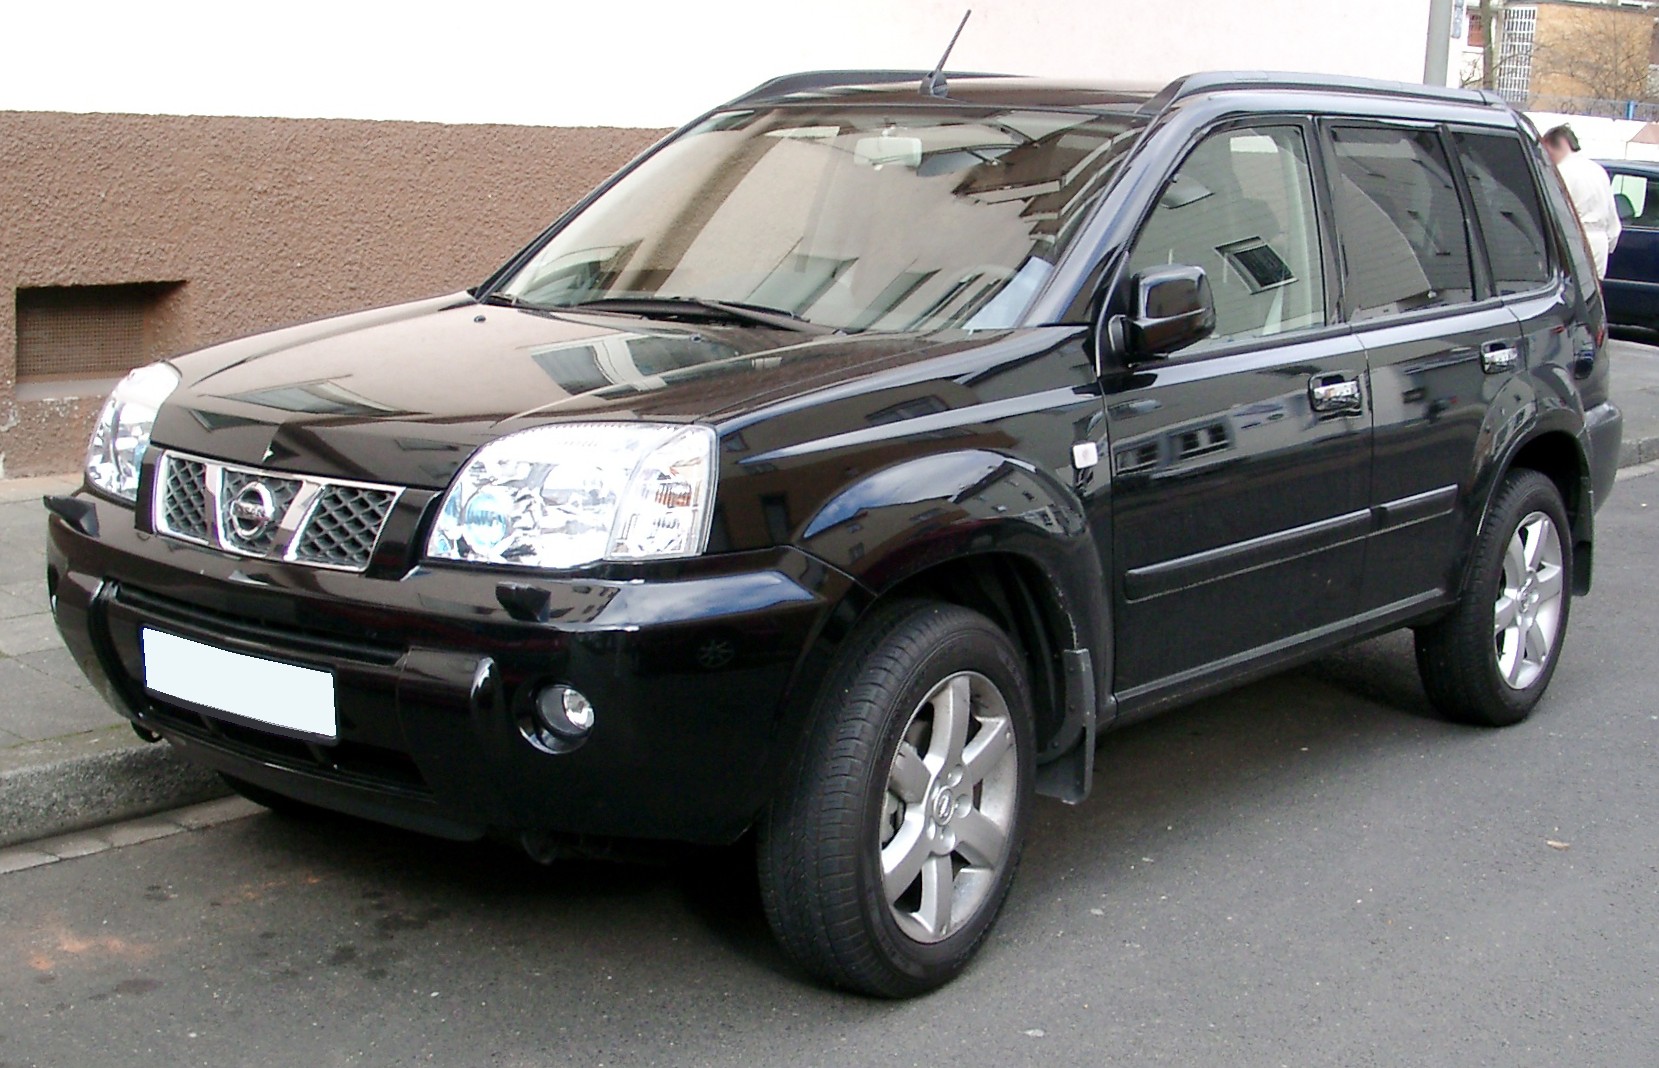 File:Nissan X-Trail front 20080131.jpg